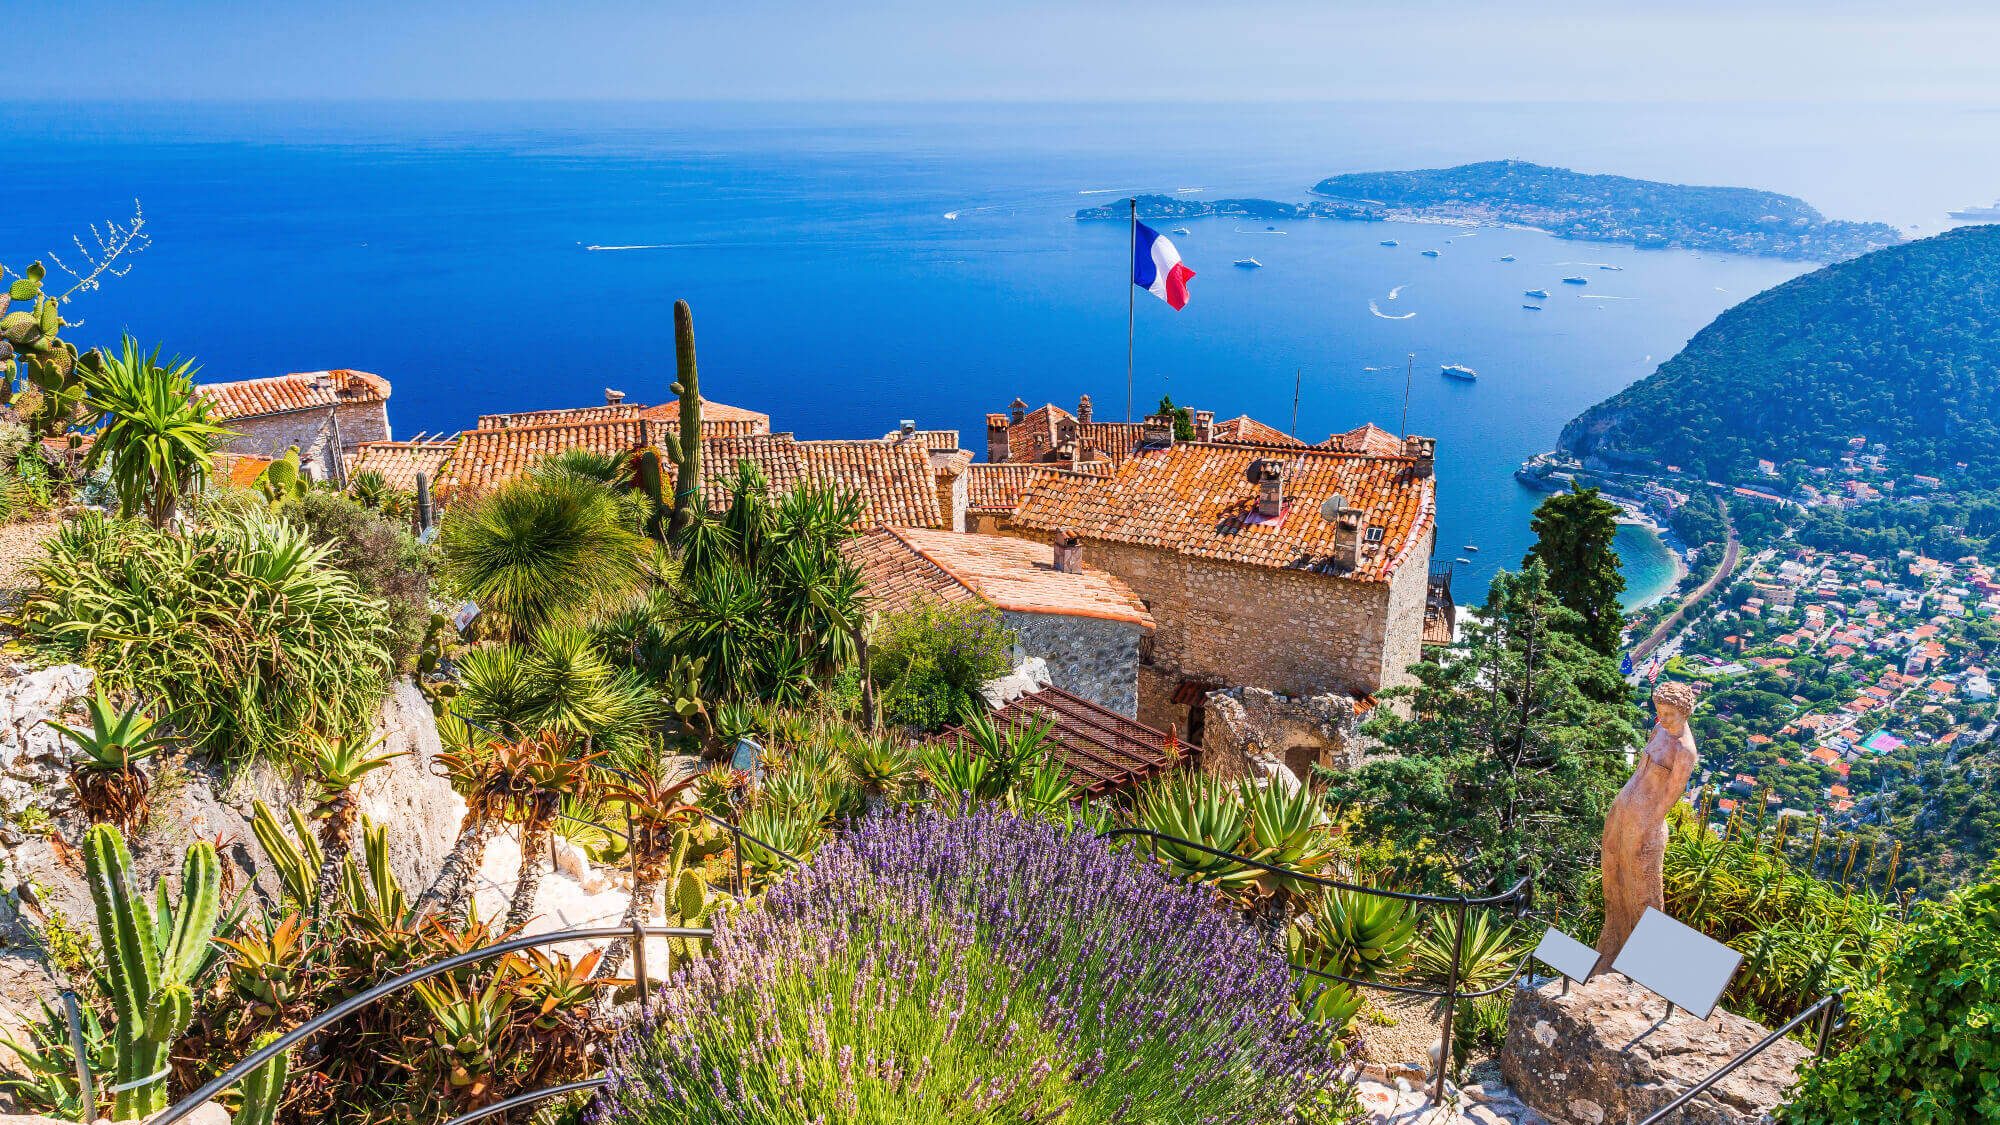 A picture of Eze Village seen from the exotic garden